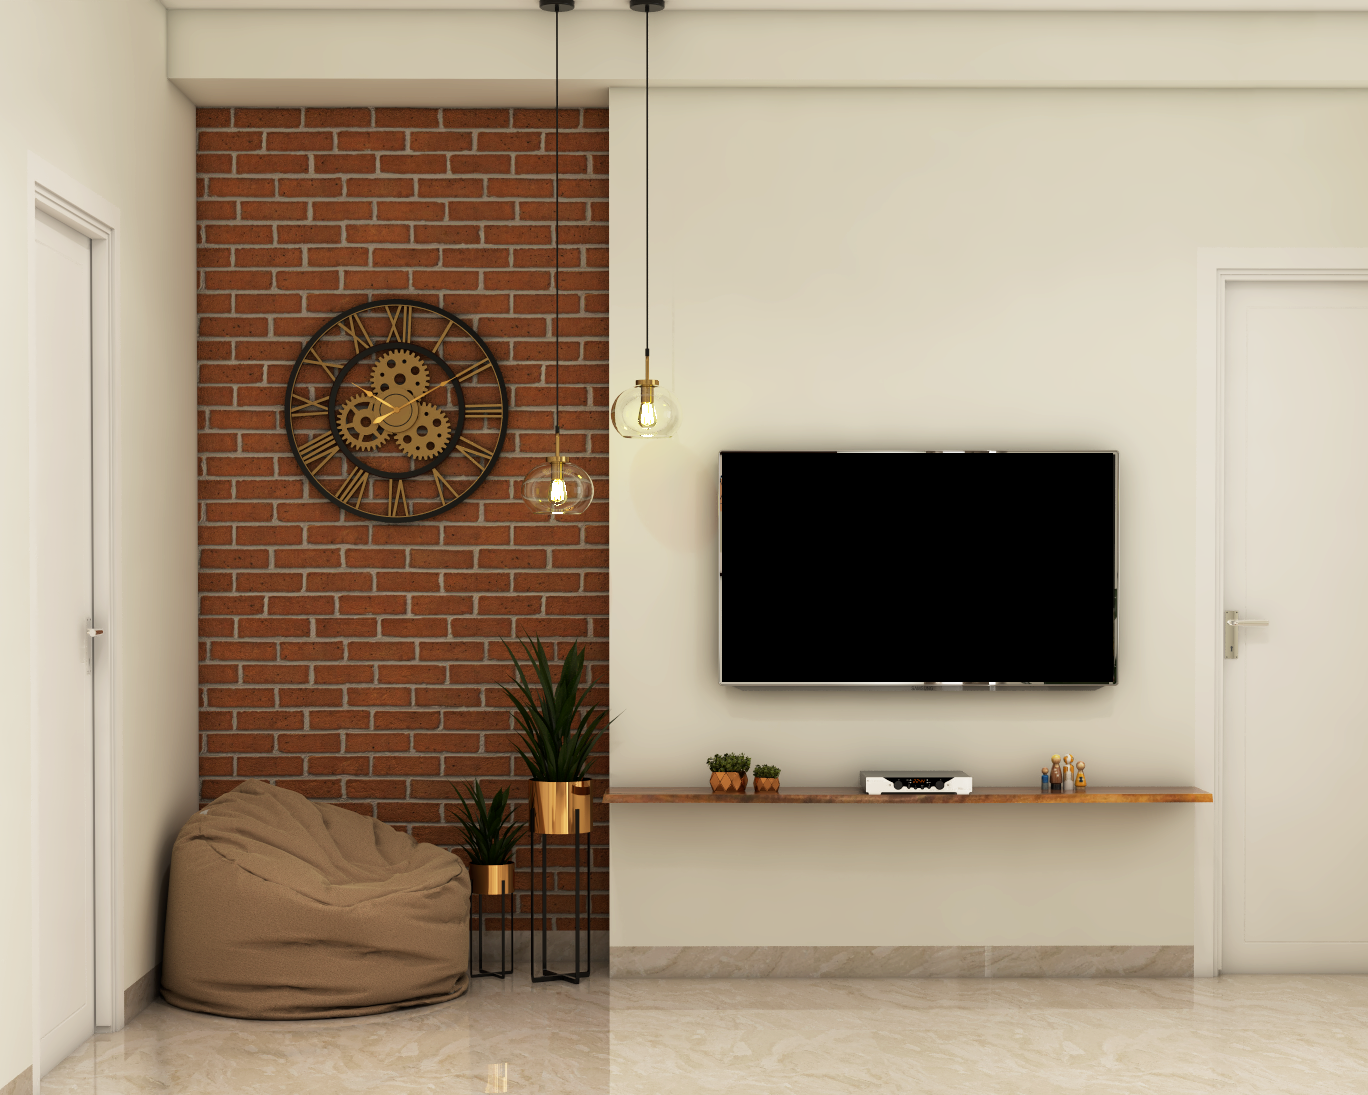 Spacious Modern Style TV Unit Design With Brick Wall